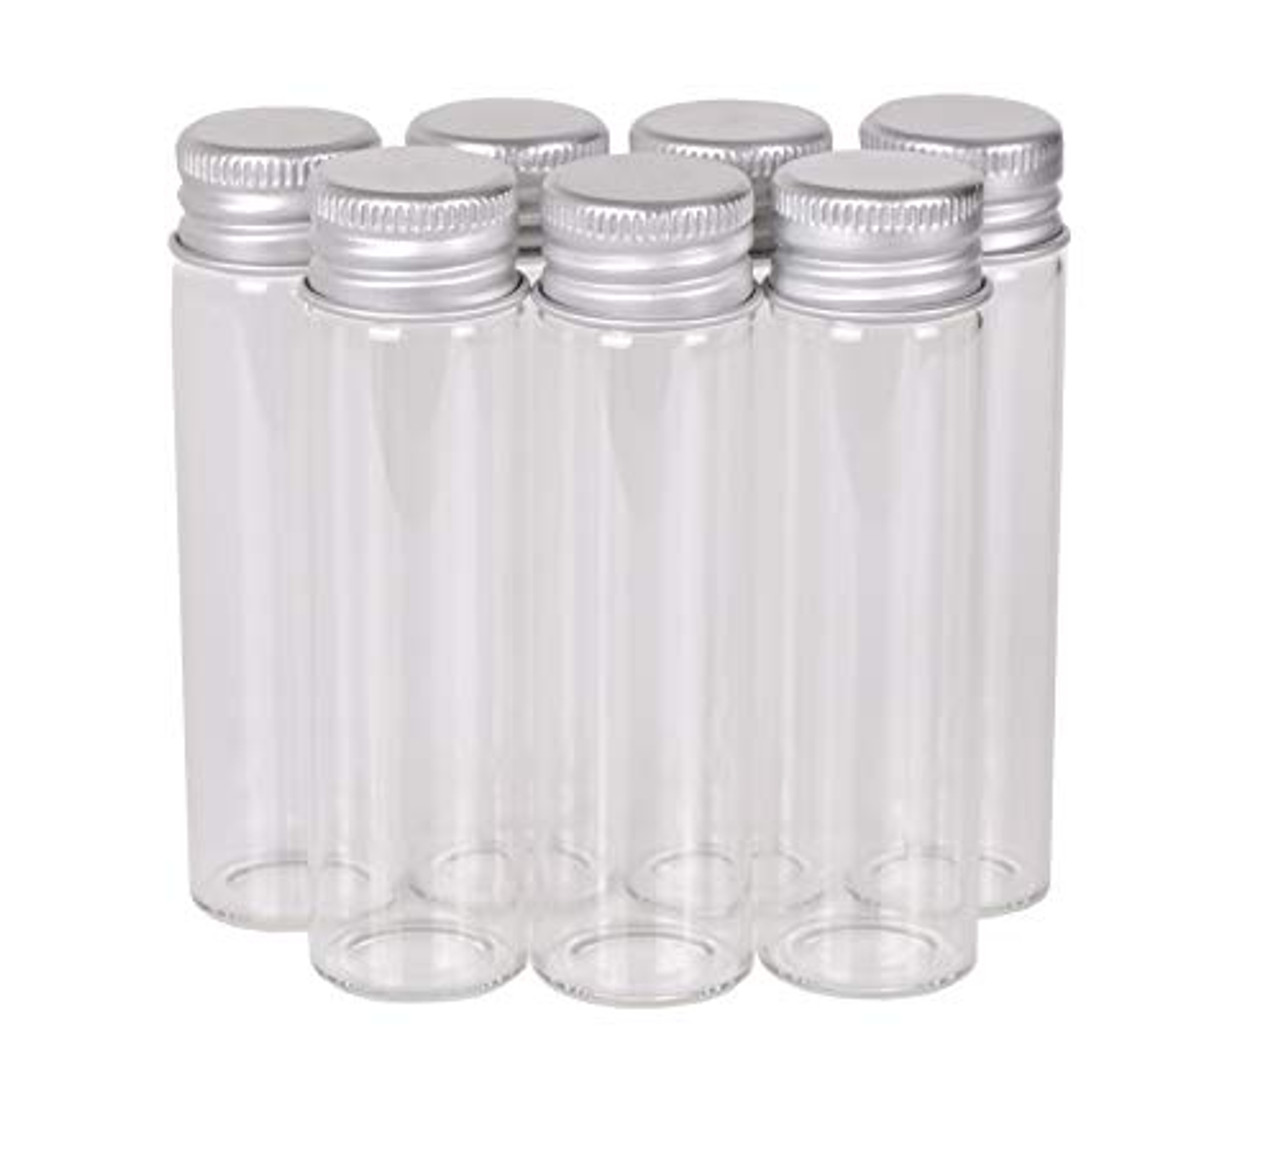 MaxMau Small Glass Bottles with Aluminum Screw Lids Clear 20 Milliliter,100 Pack